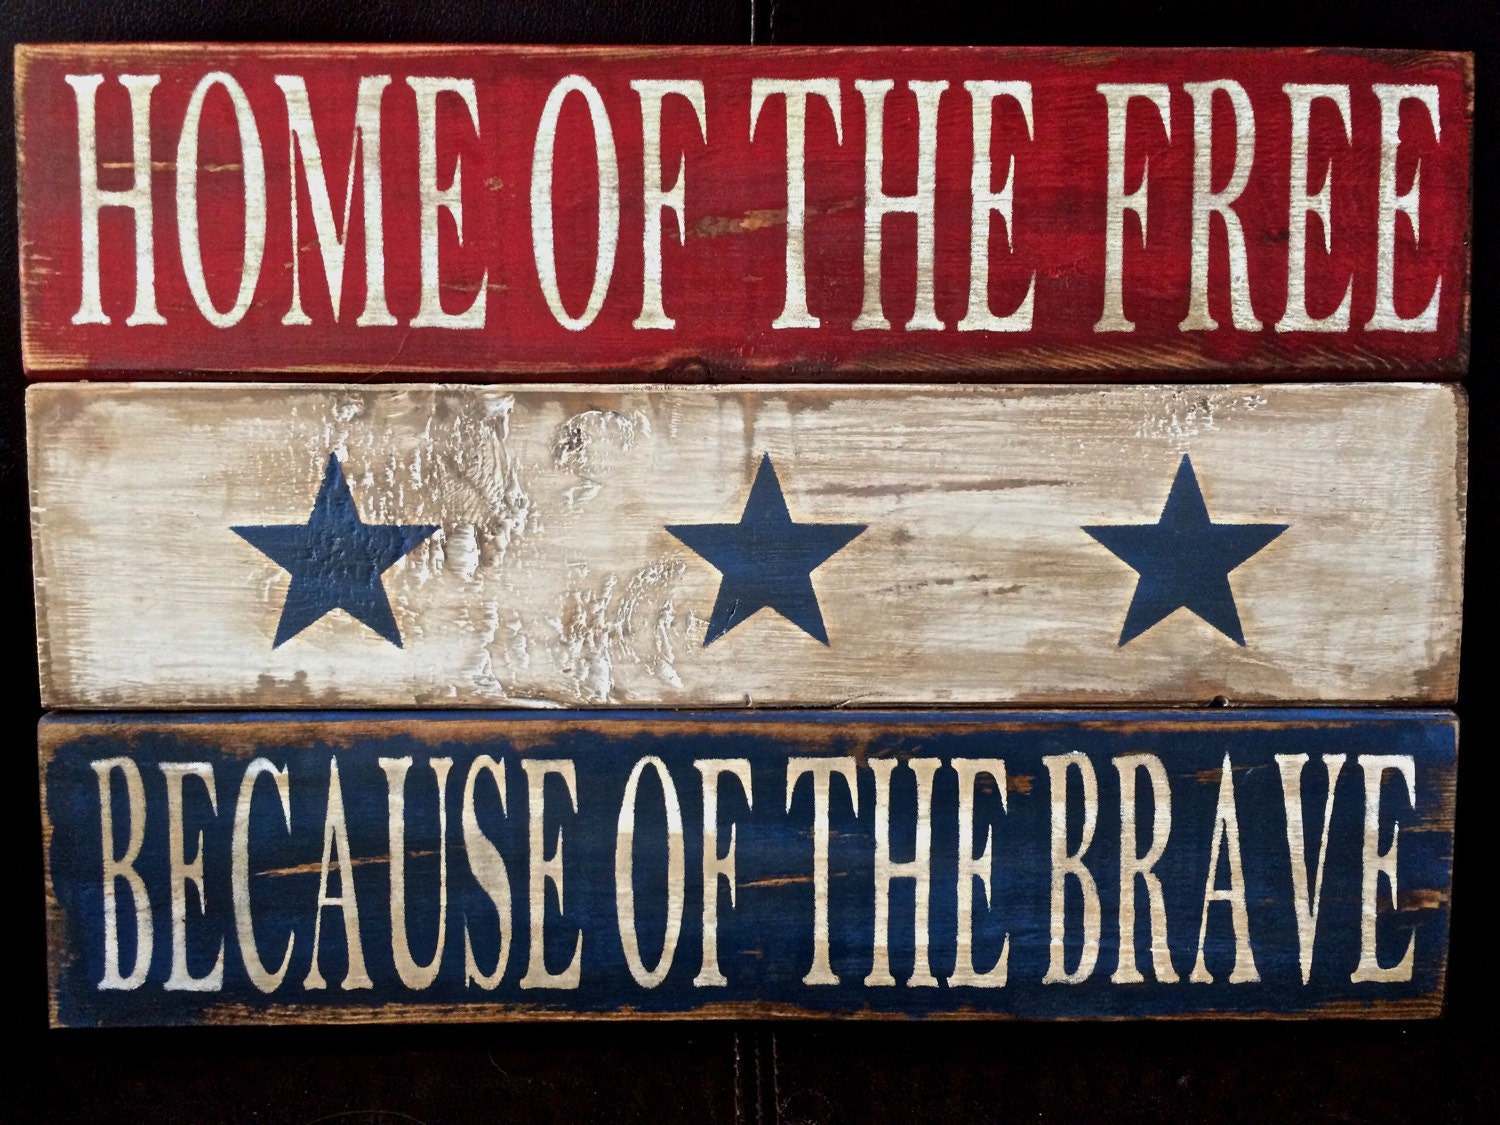 and the home of the brave